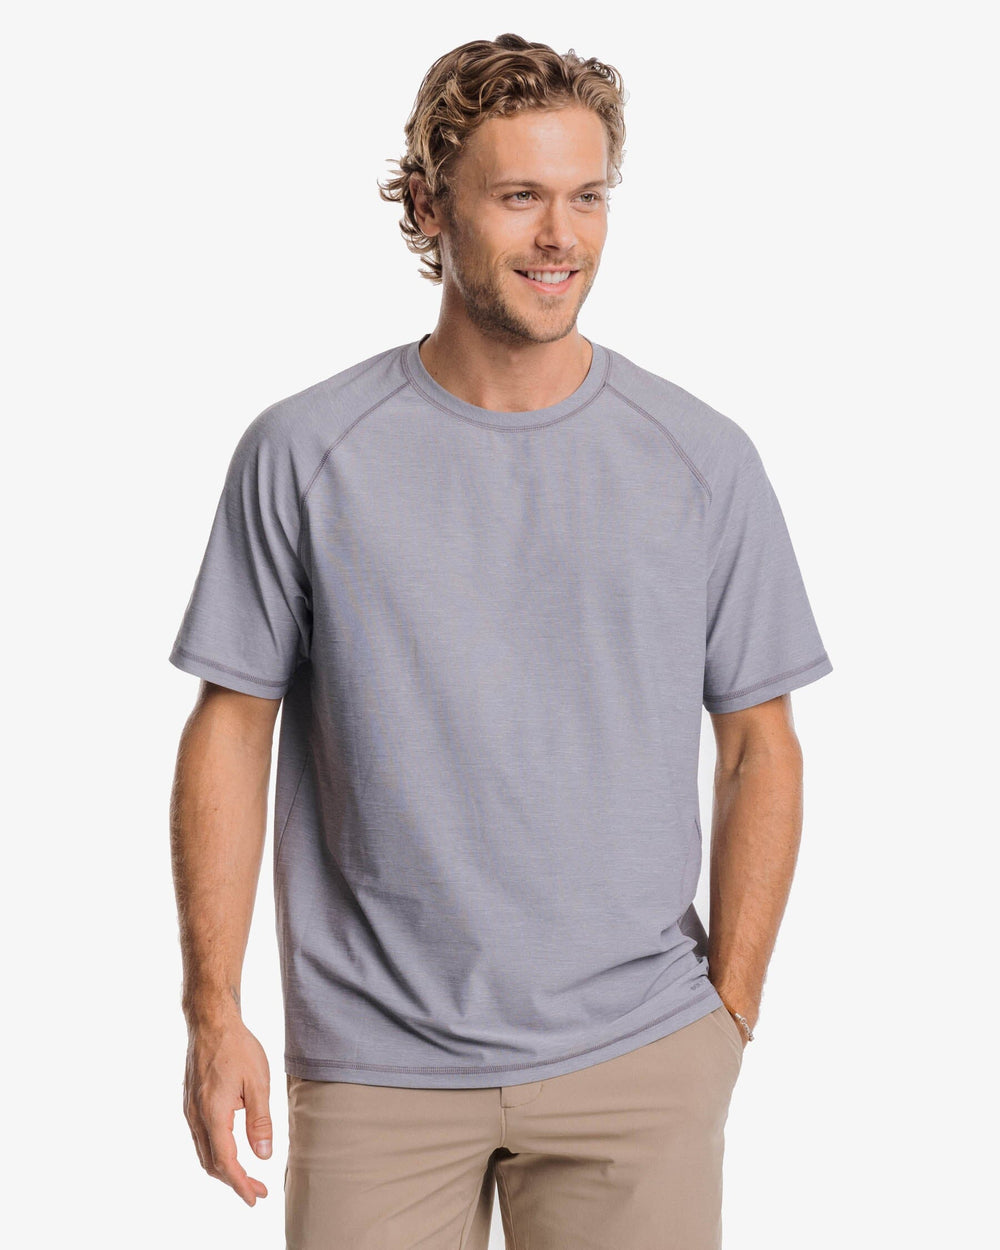 The front view of the Southern Tide brrr°®-illiant Performance Tee by Southern Tide - Steel Grey